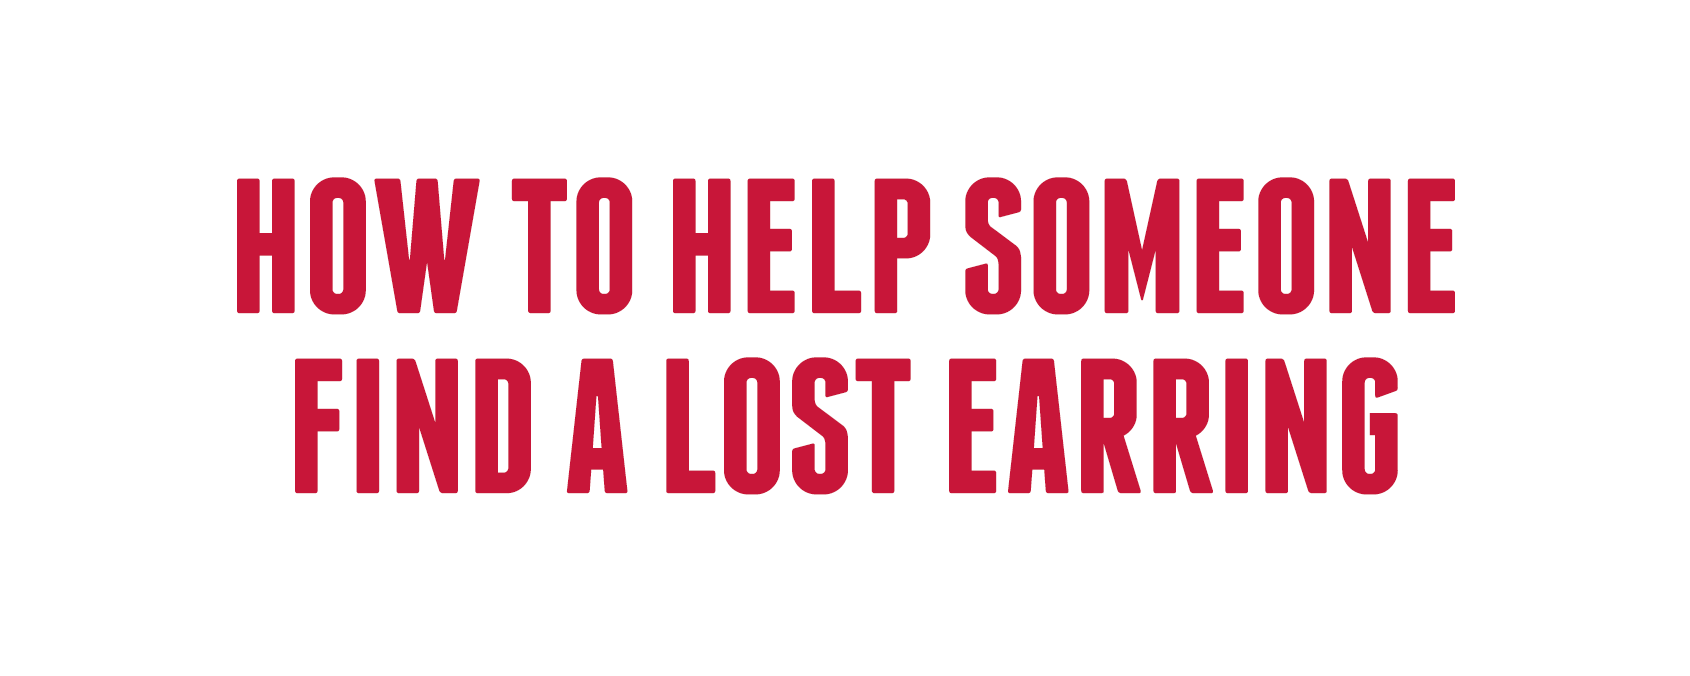 How to help someone find a lost earring